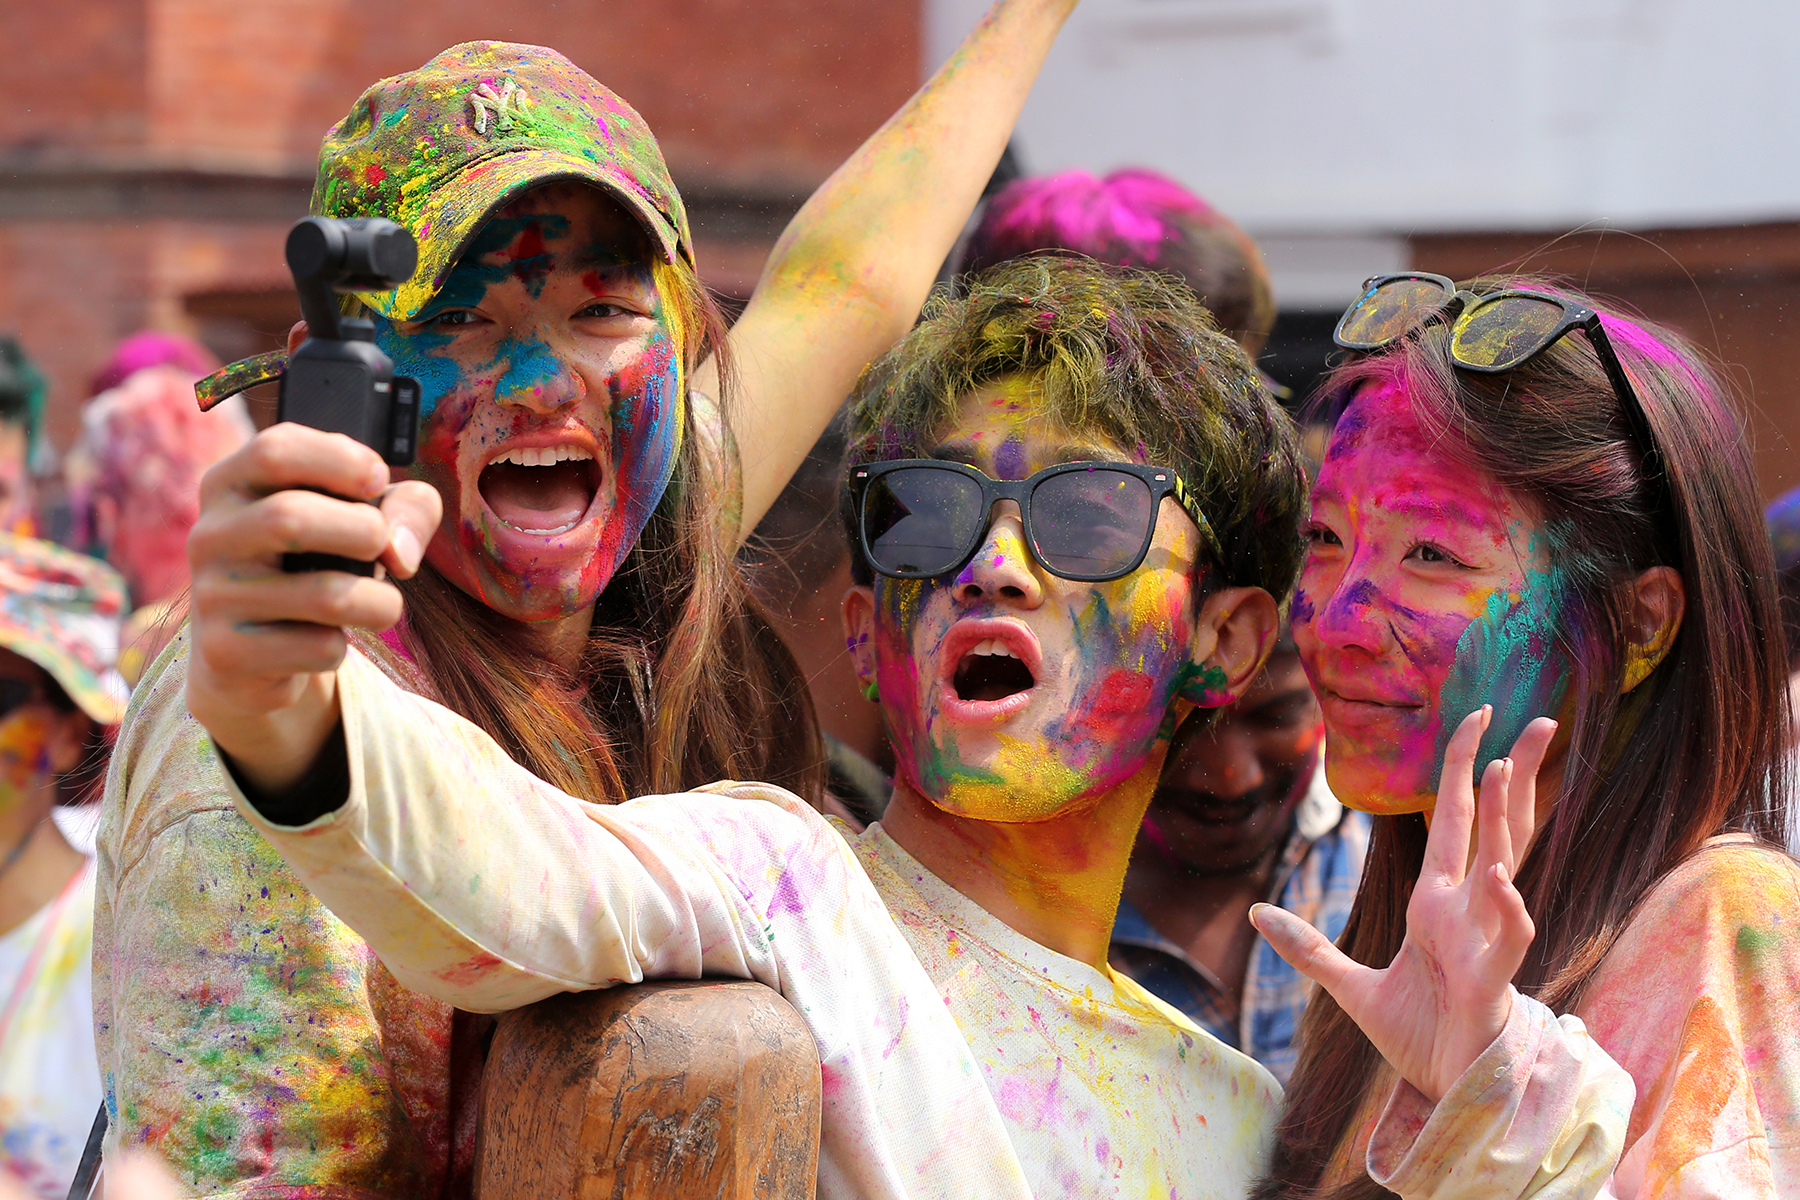 Original cultural traditions linked with Holi celebrations fading with time